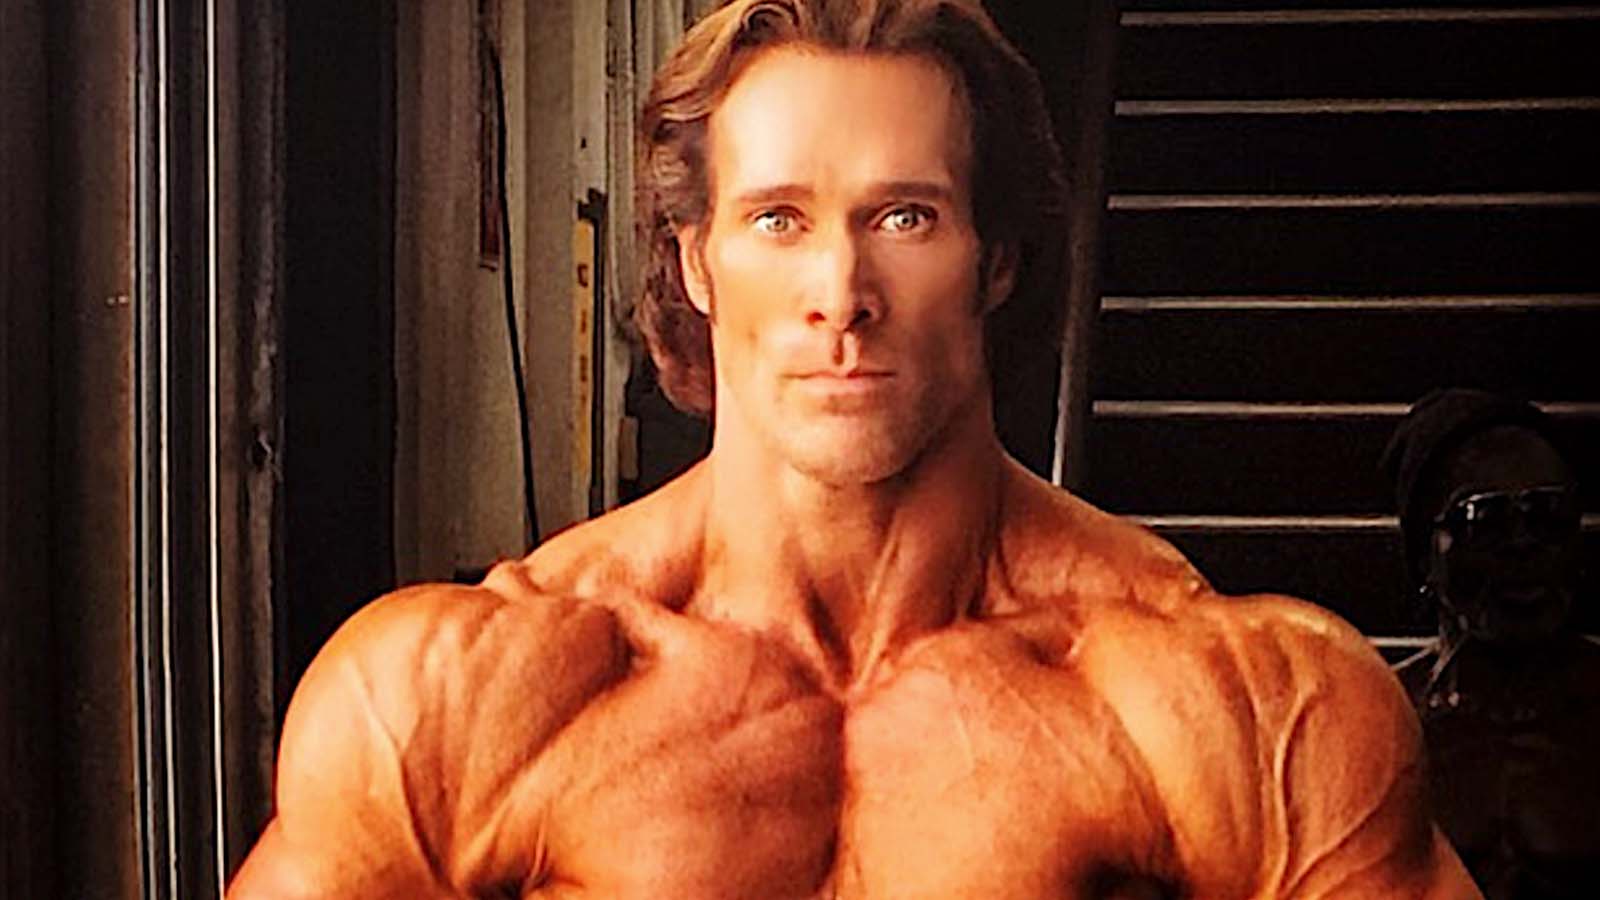 Mike O Hearn: Success in Fitness Comes From Staying Consistent Not